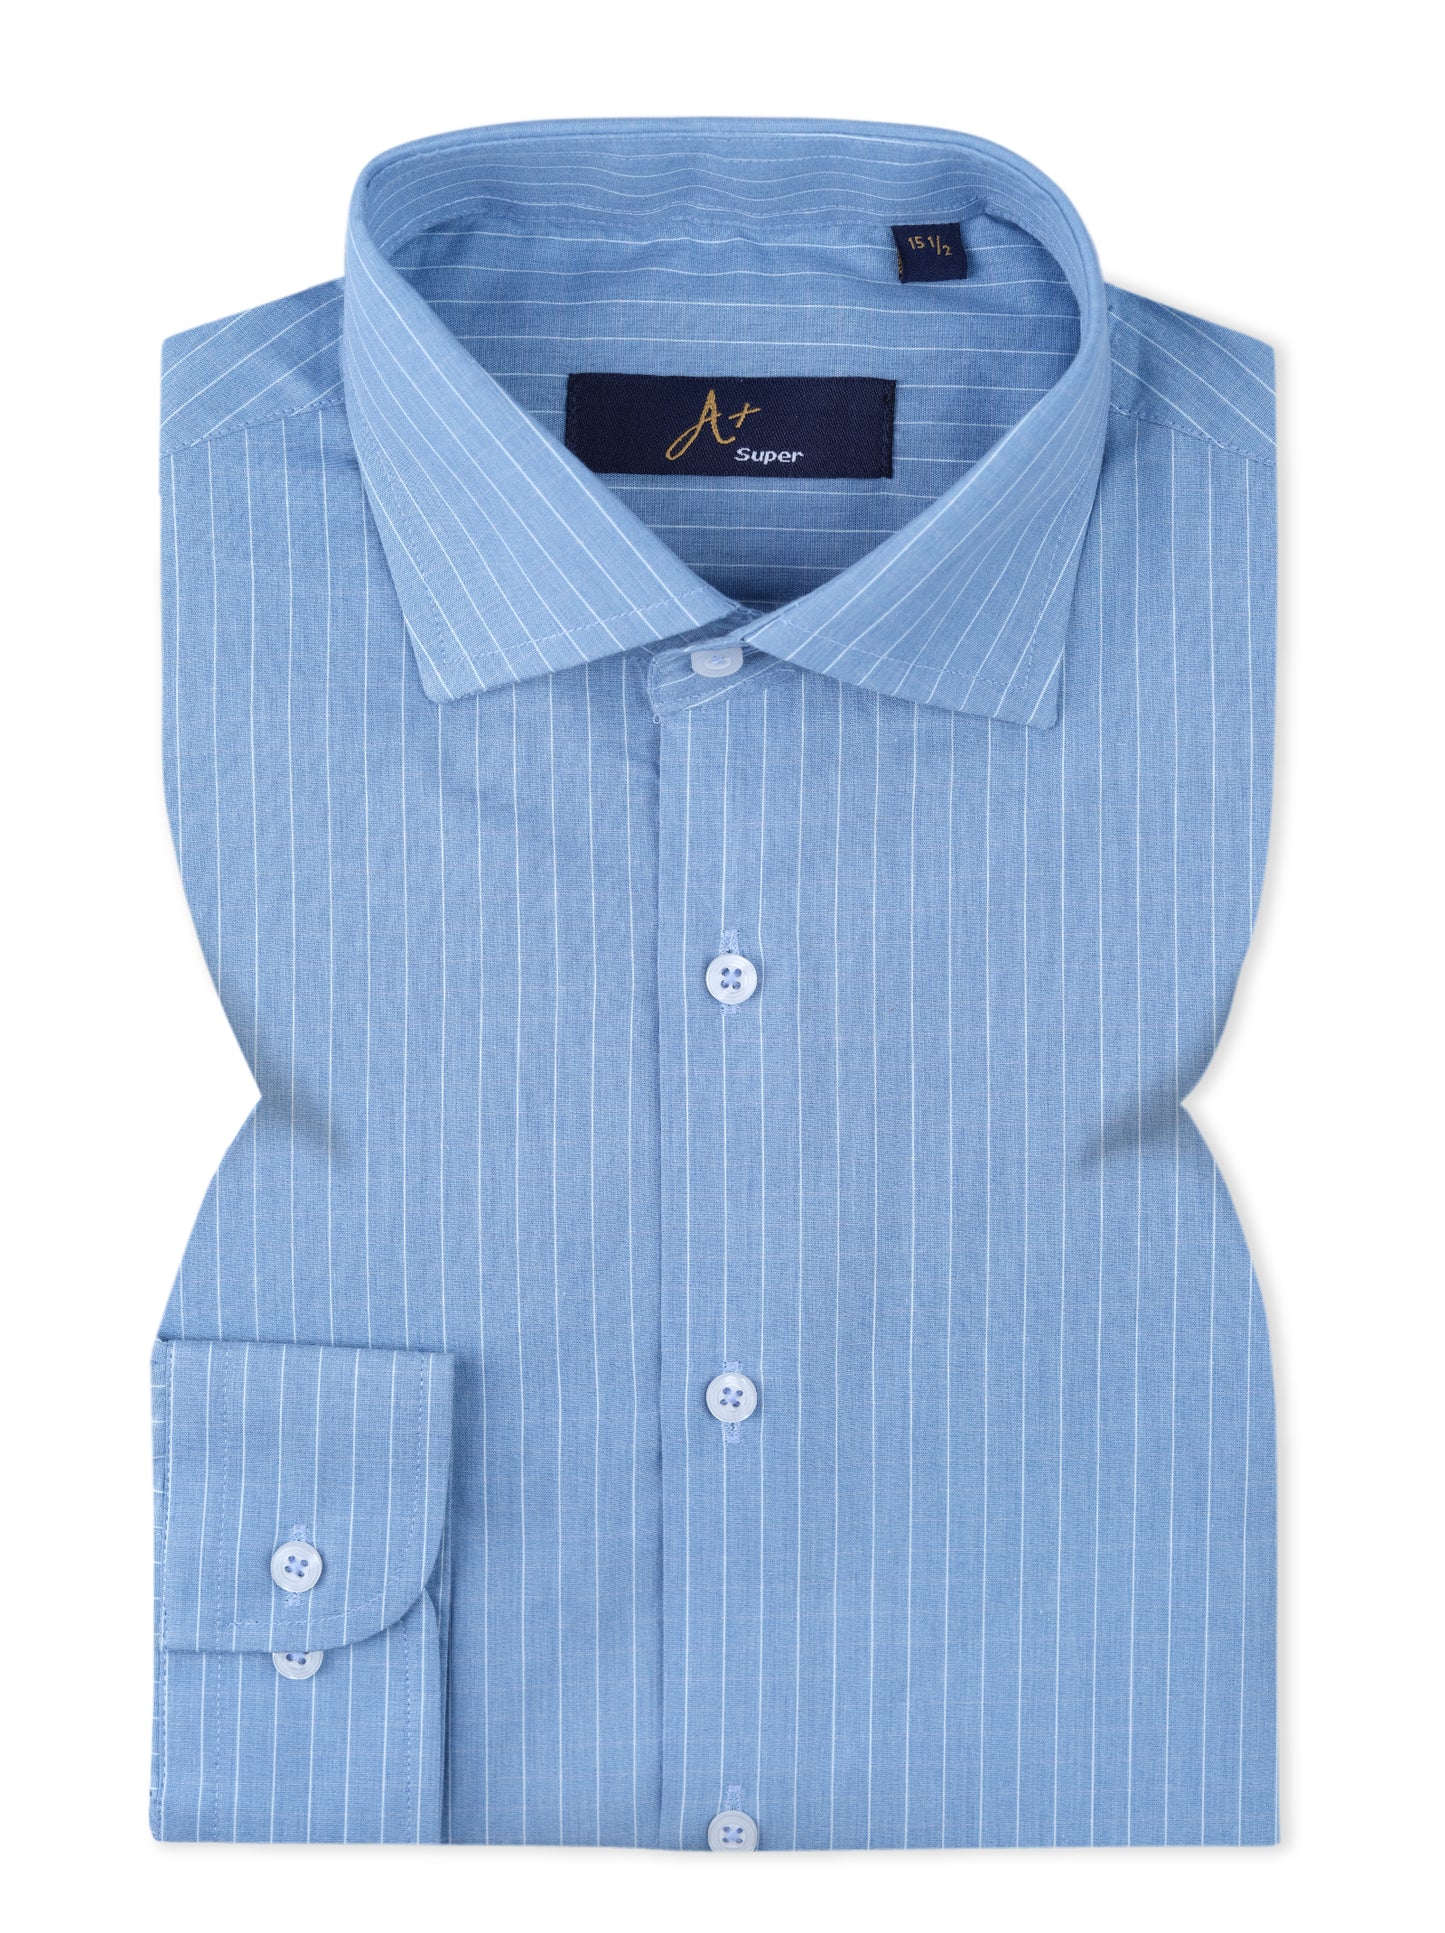 Blue with White Pinstripe Dress Shirt  Smart Fit